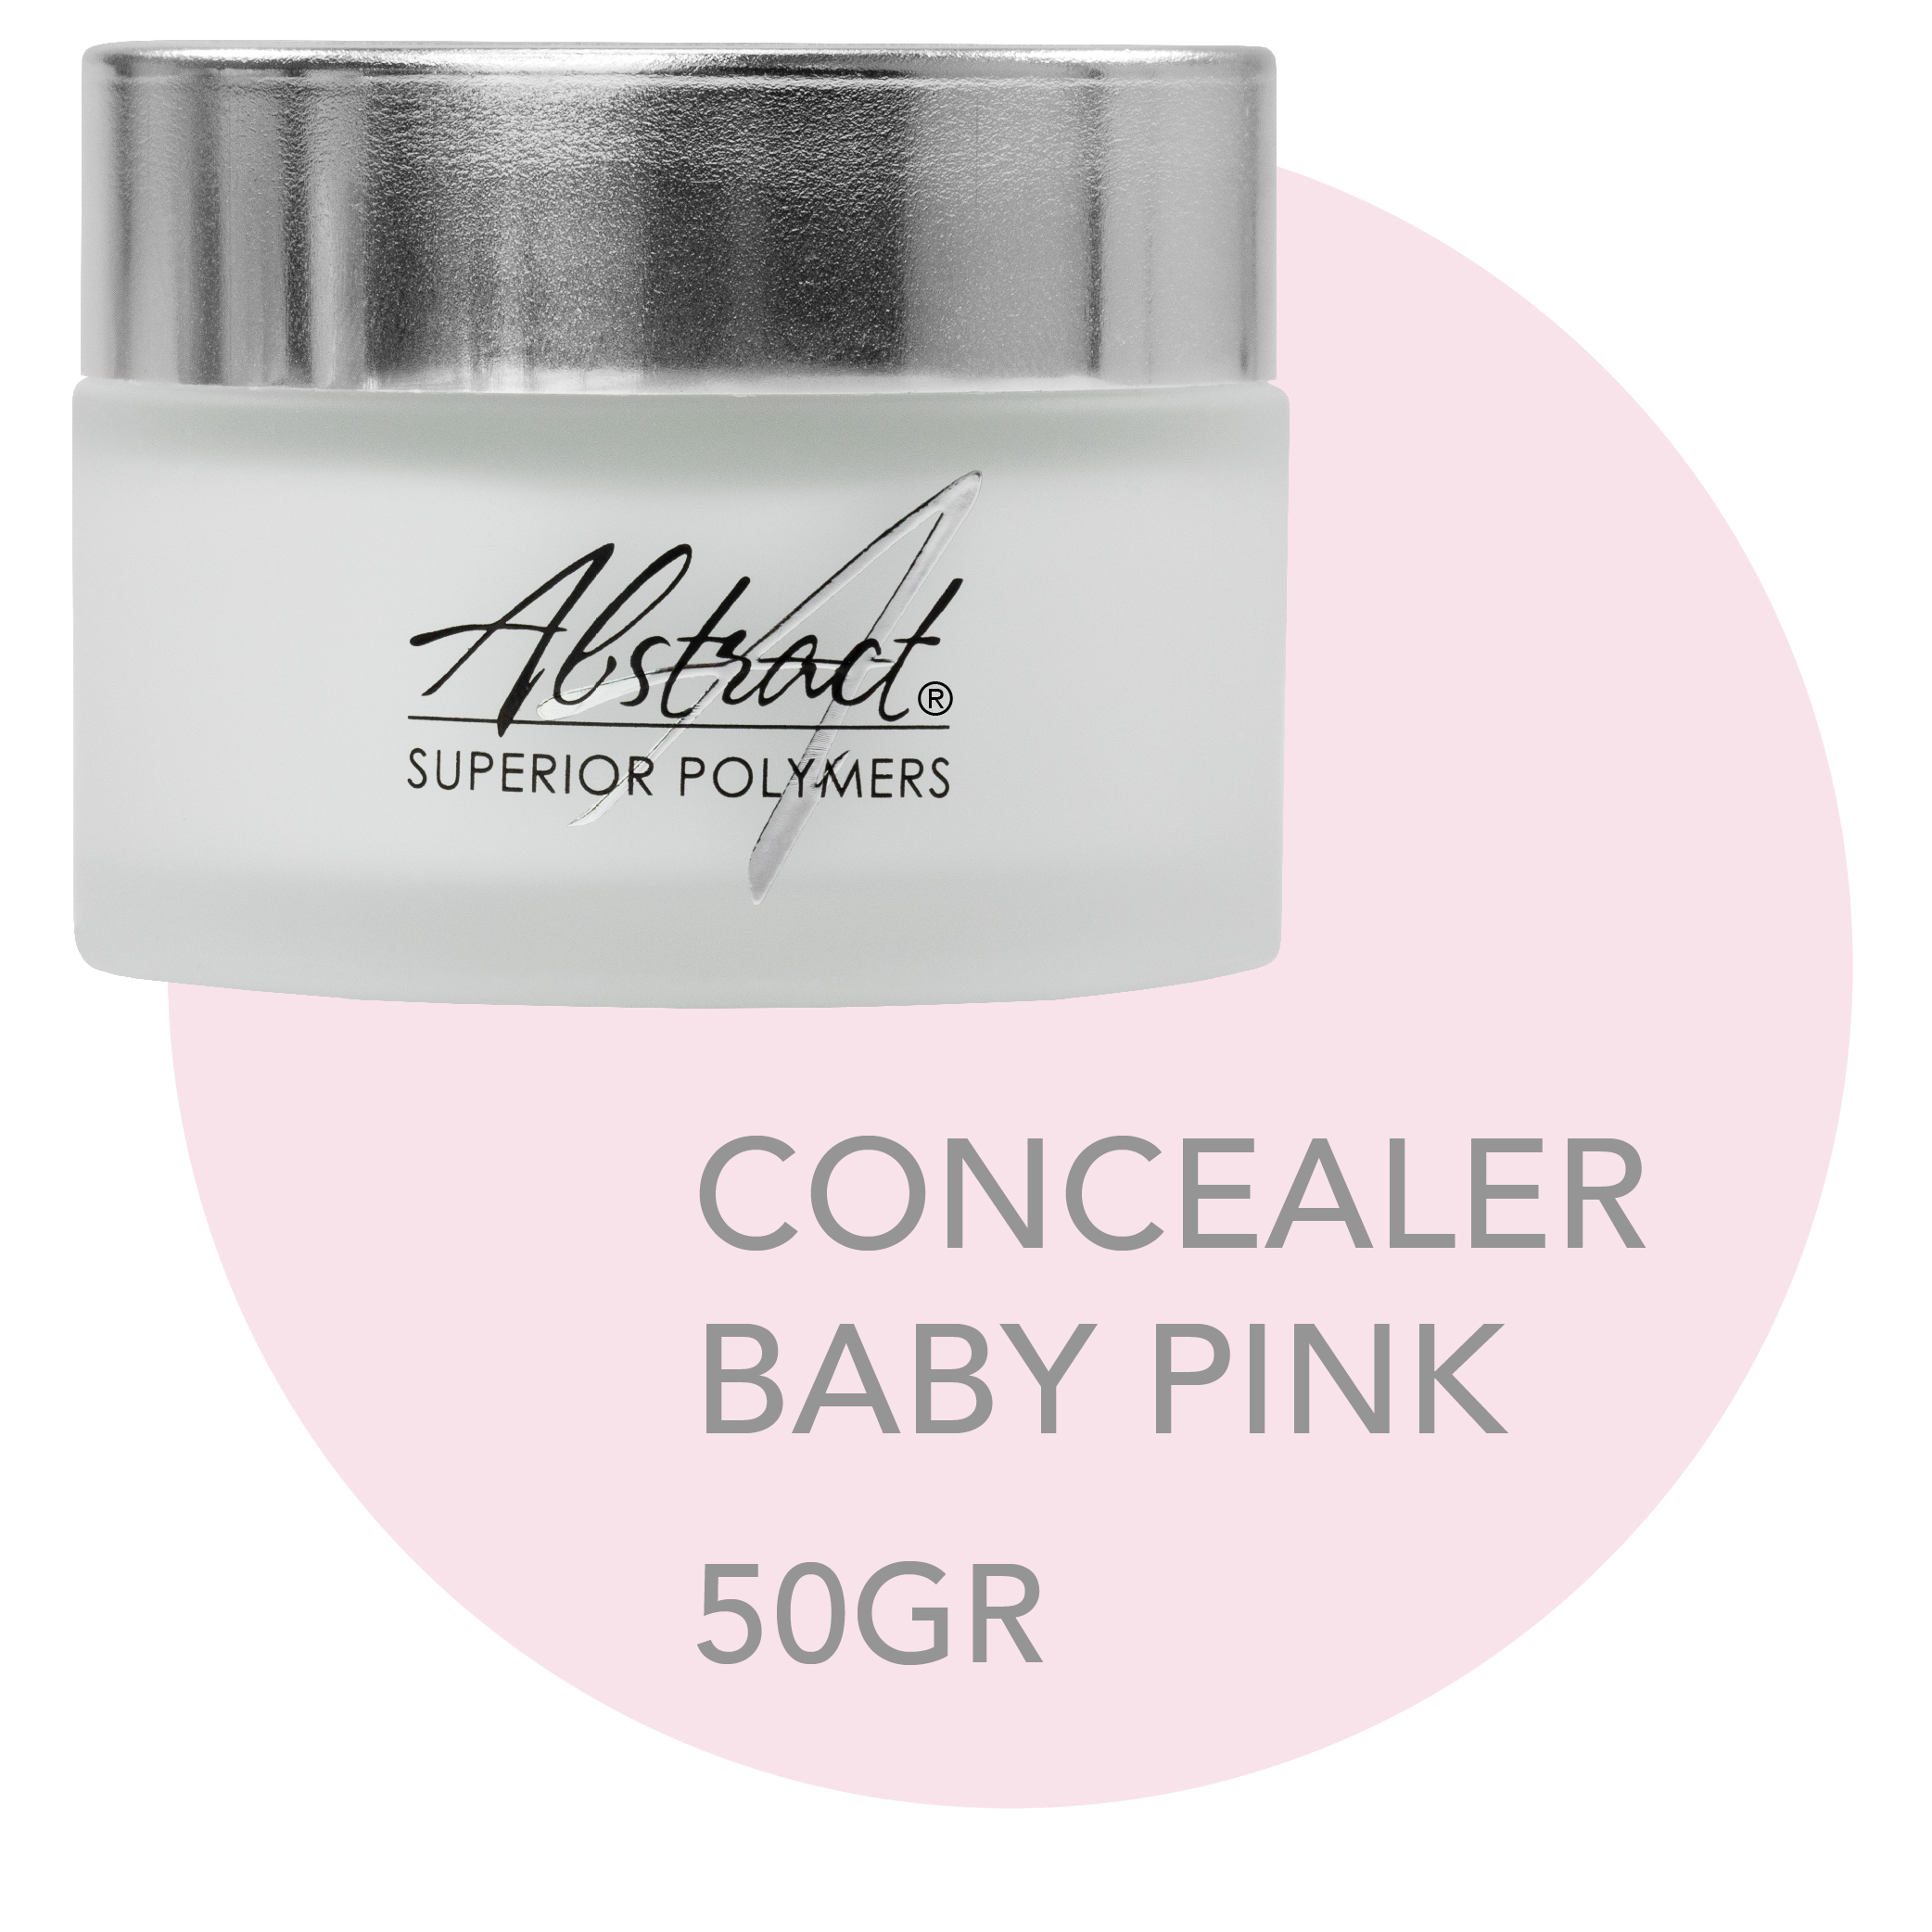 Superior Polymer CONCEALER BABY PINK 50gr, Abstract | 188997